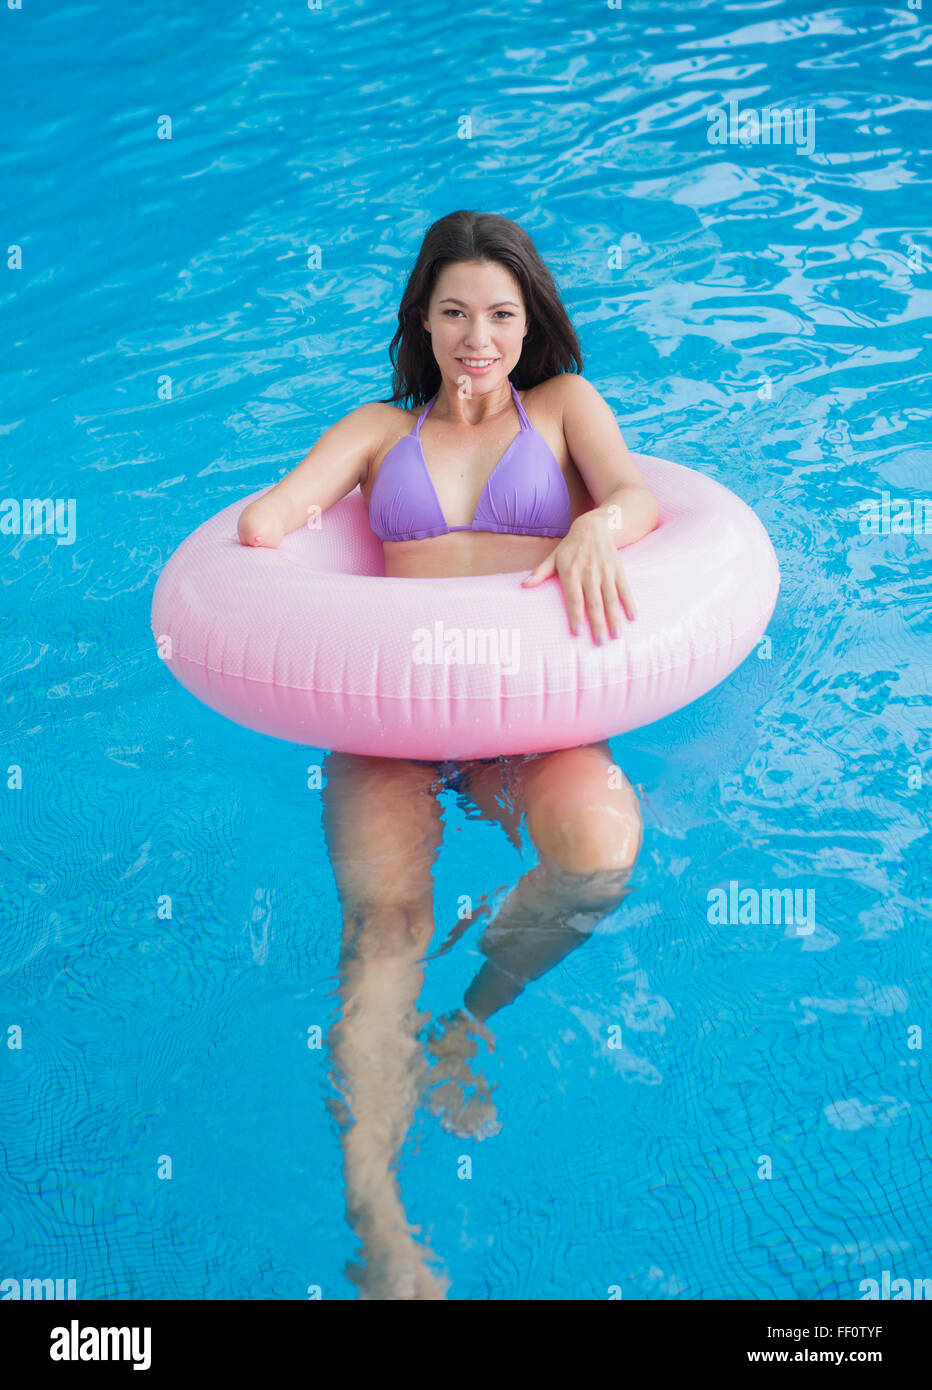 Mixed race amputee woman swimming in pool Stock Photo